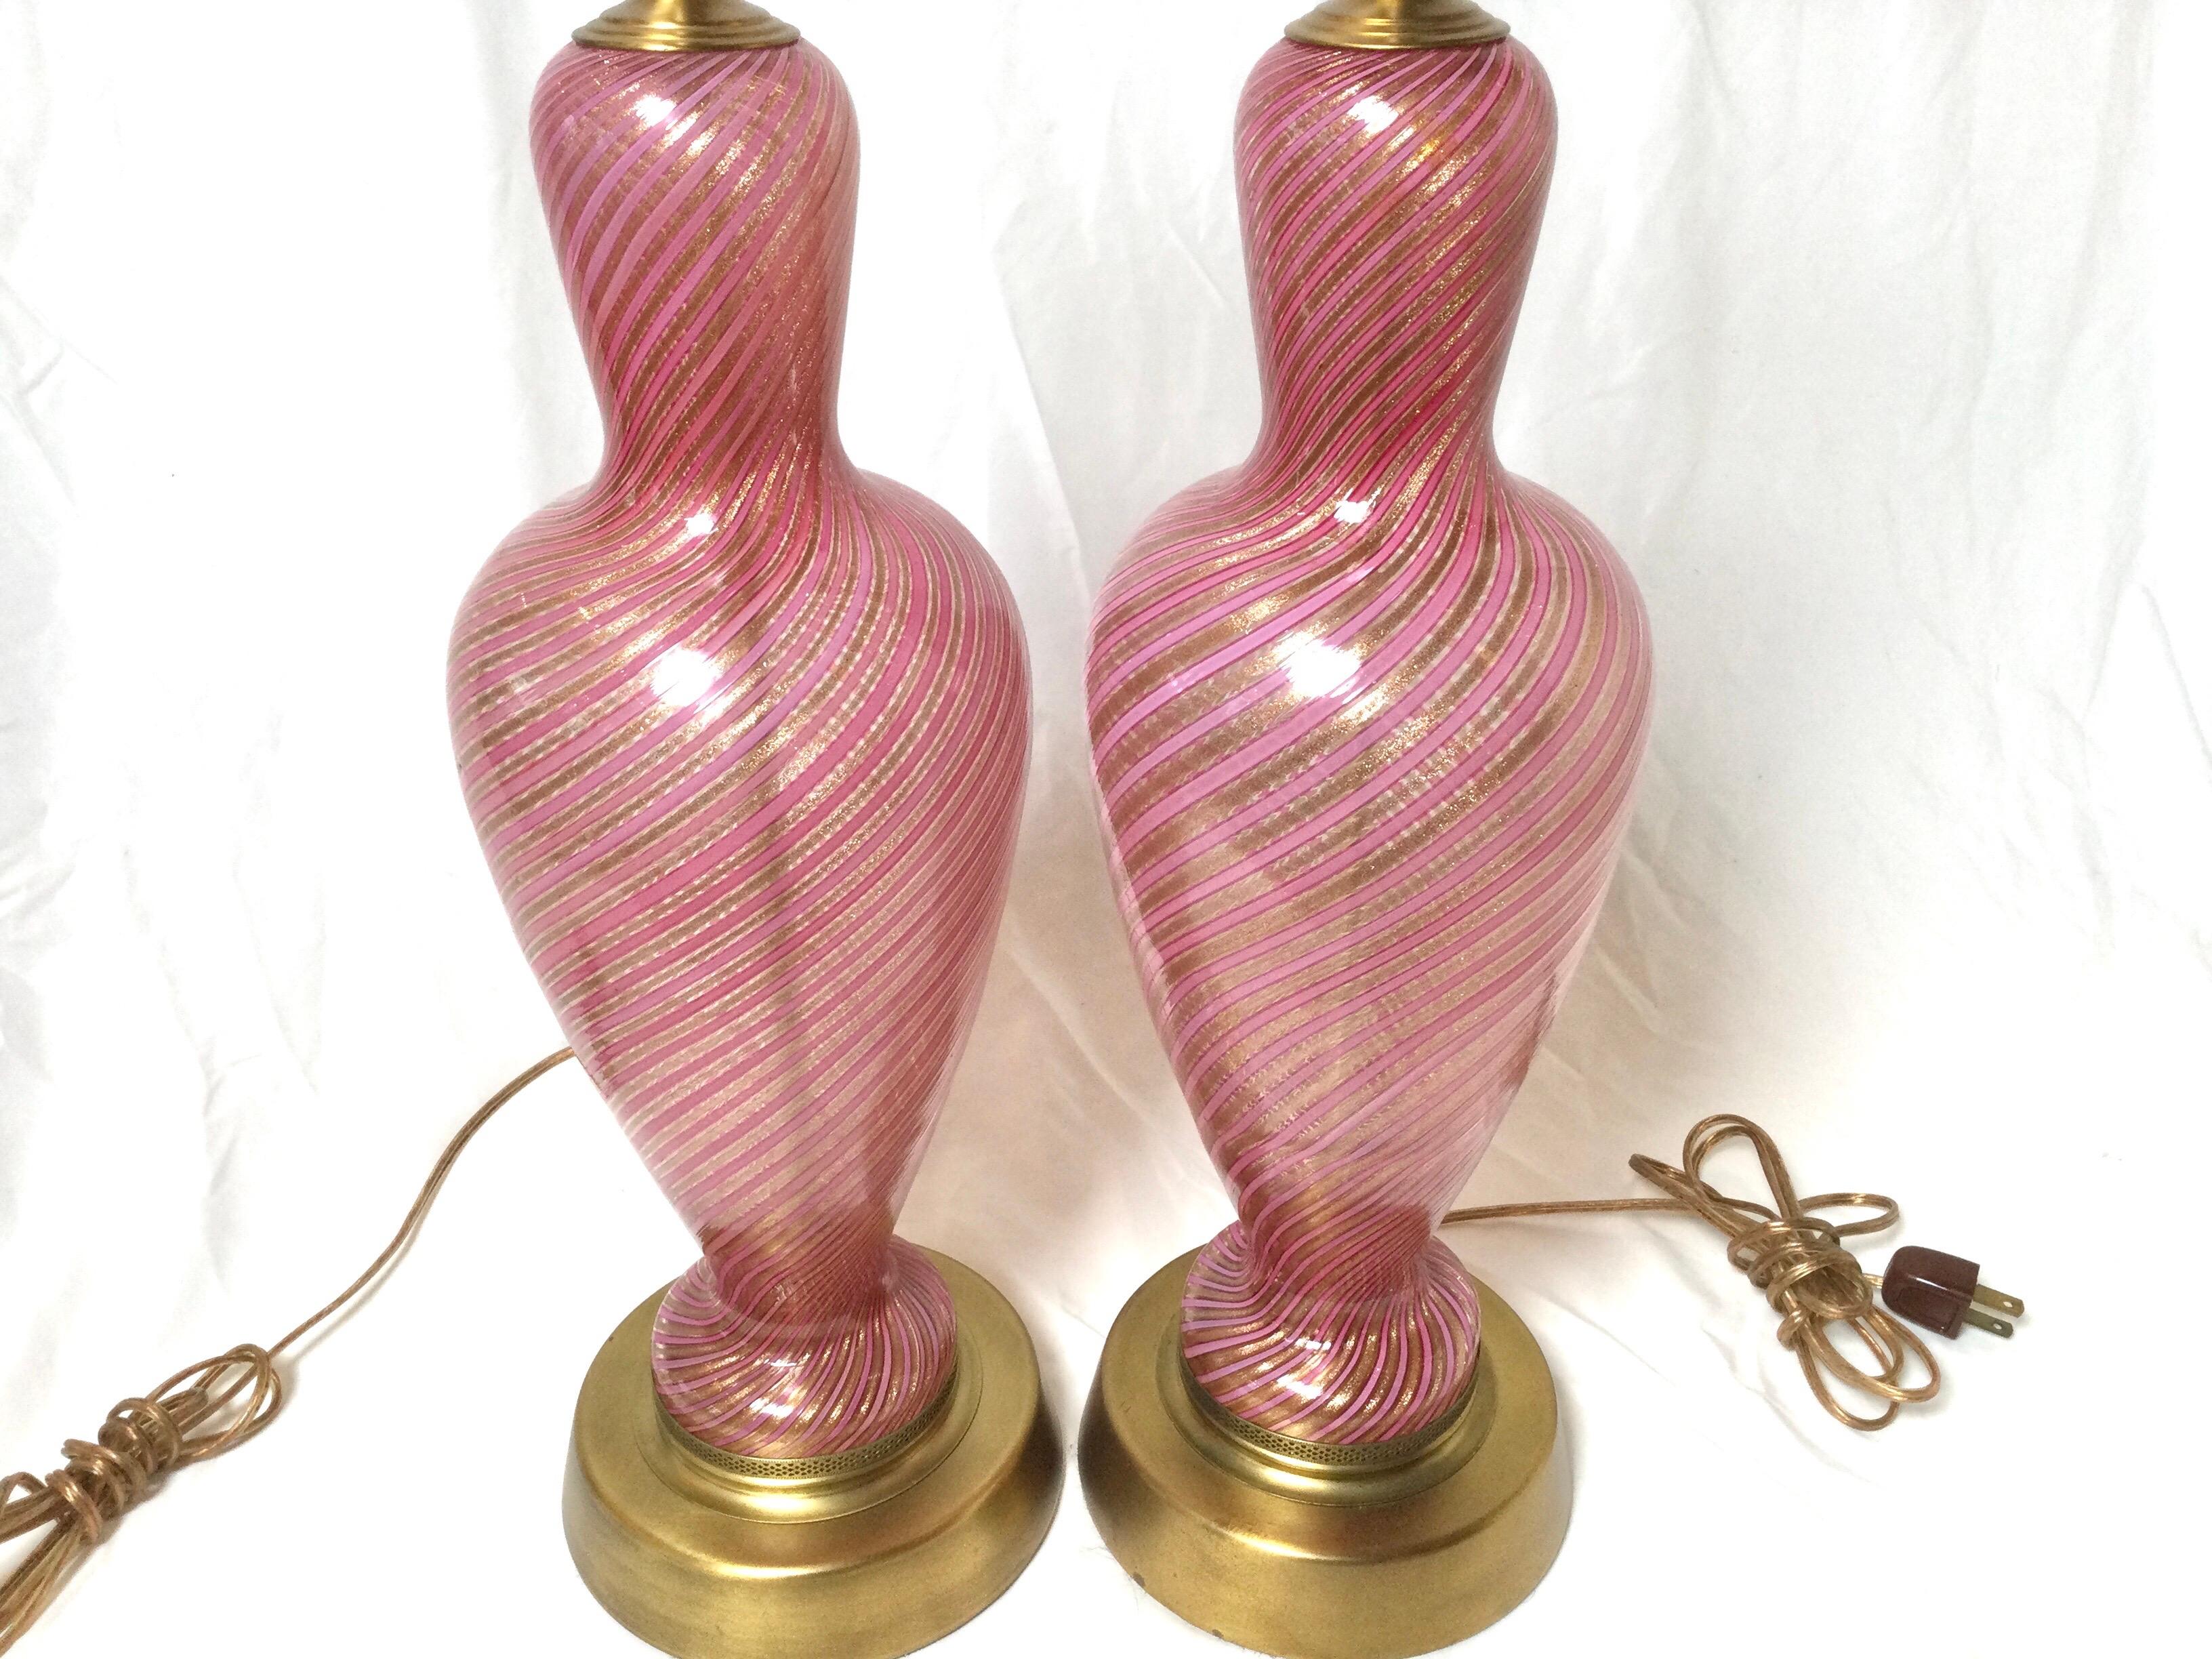 Elegant pair of hand blown Italian Murano glass lamps. The pink and transparent swirled glass on gold toned metal bases. Height to top of a shade would be 31